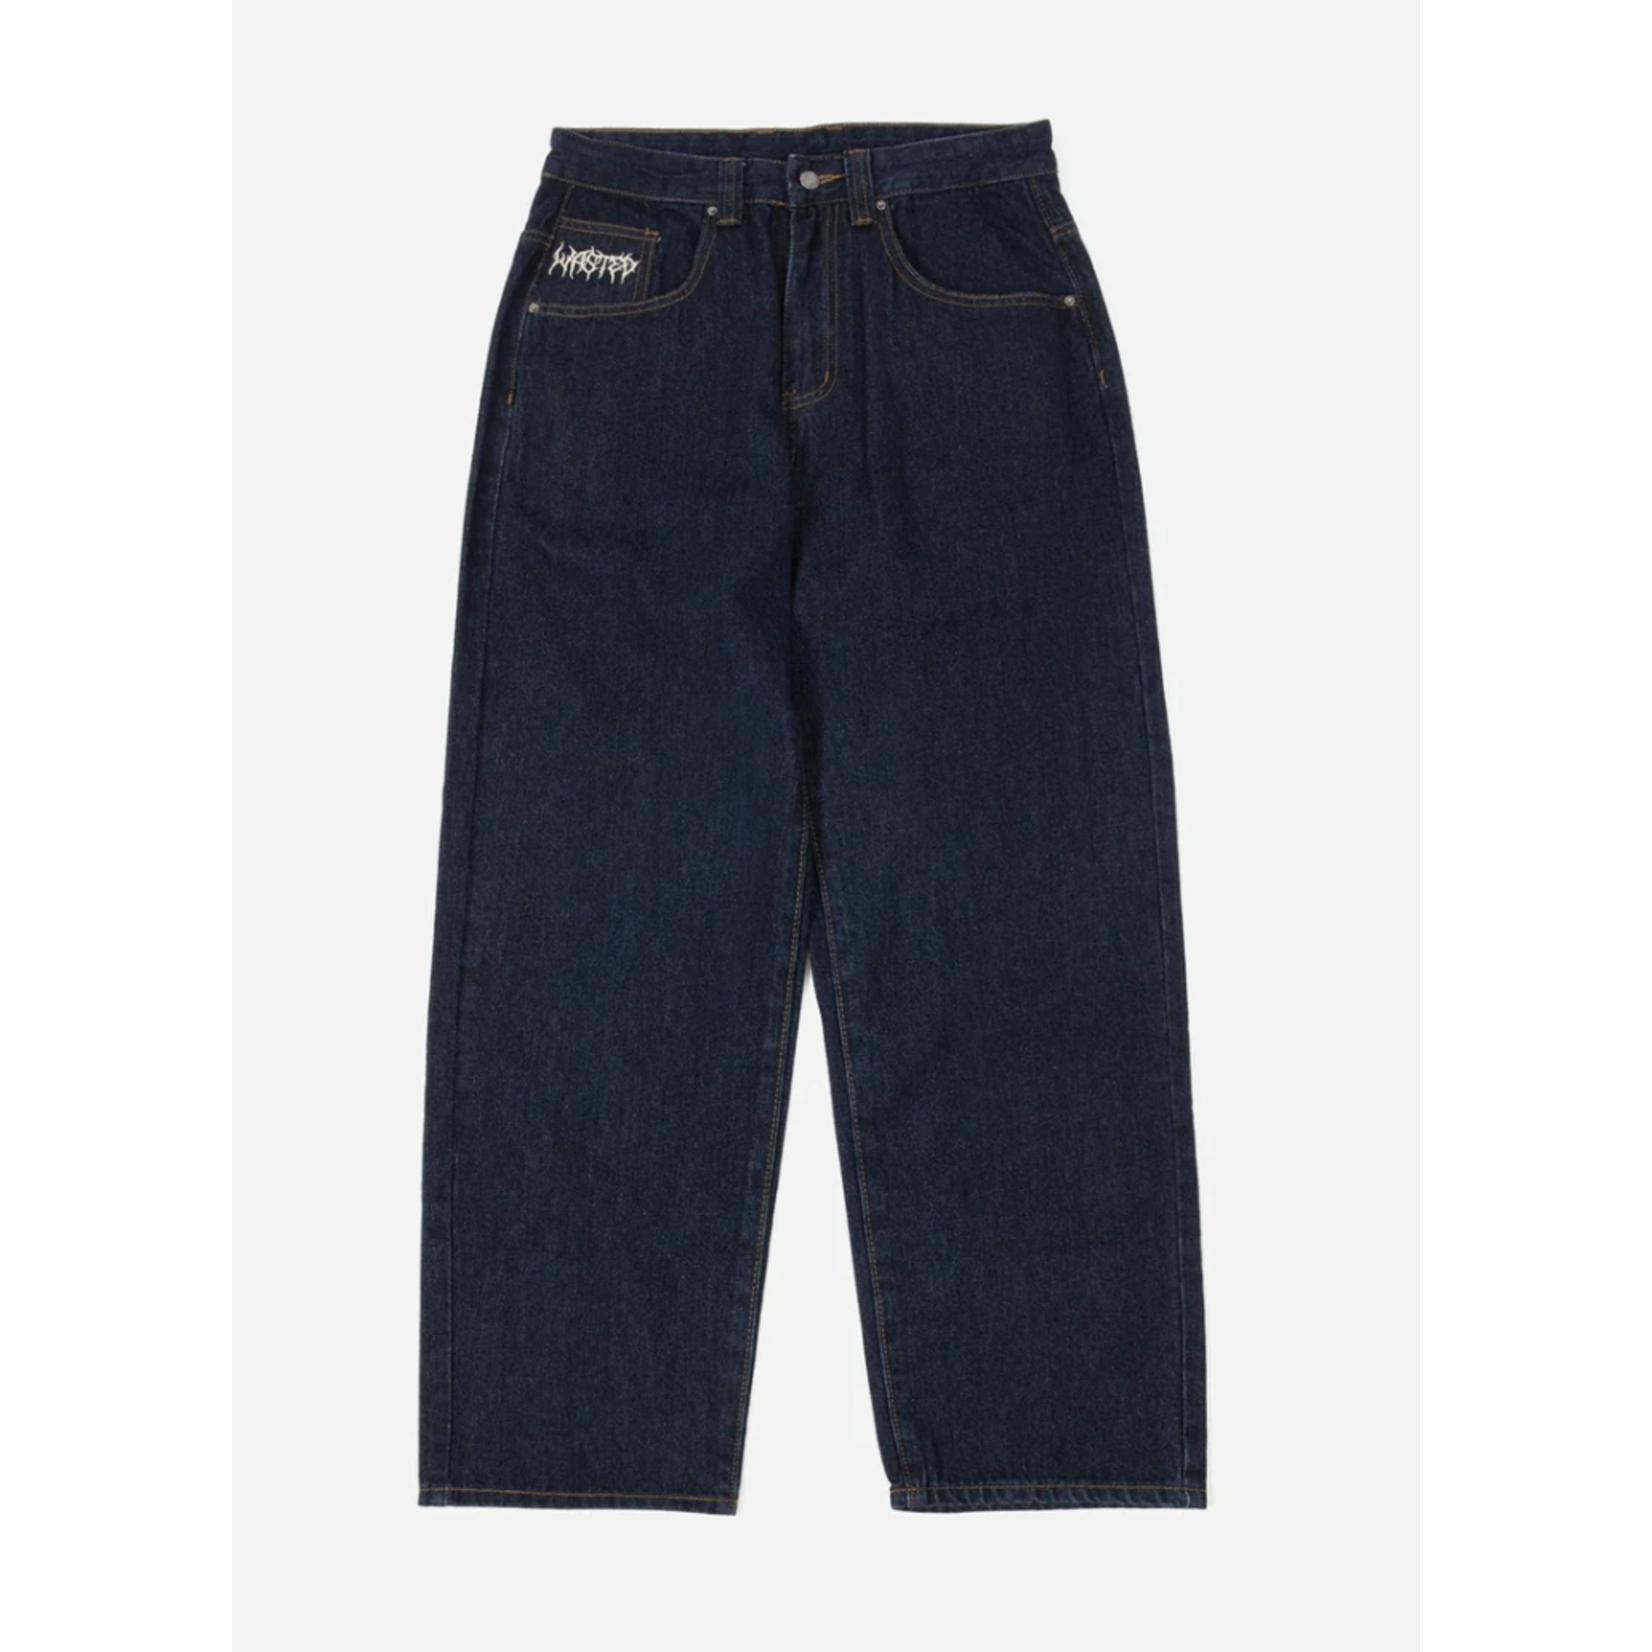 WASTED PARIS Wasted Paris - Casper Feeler Pant - Raw Blue